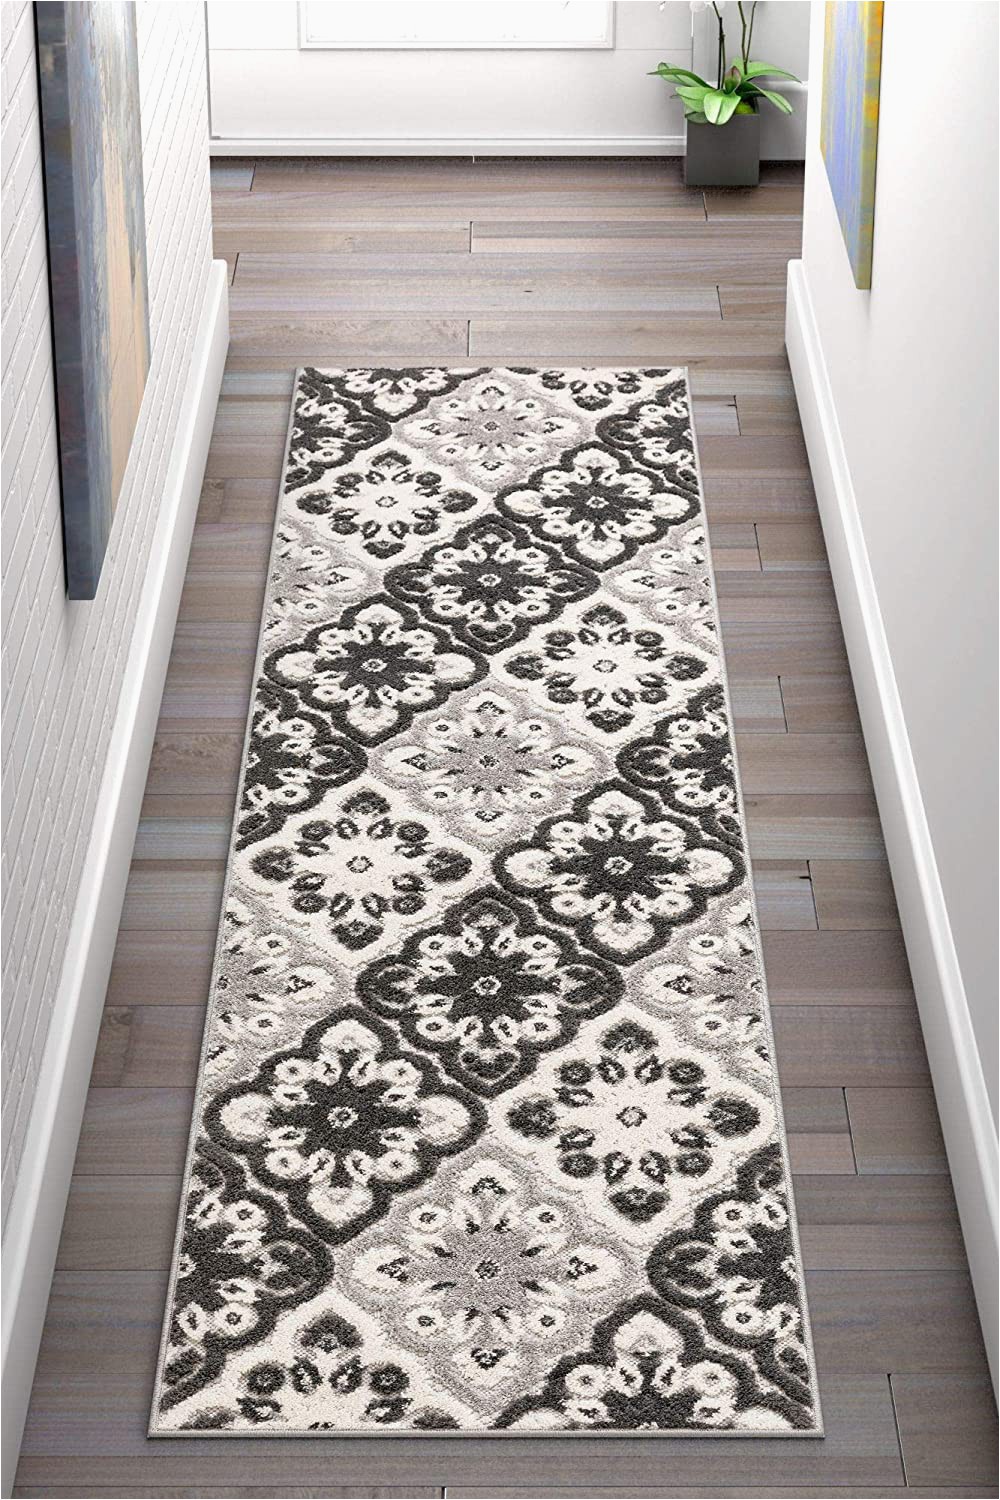 Best Type Of Rug for High Traffic area Amazon Well Woven Bodrum Grey Indoor Outdoor Floral